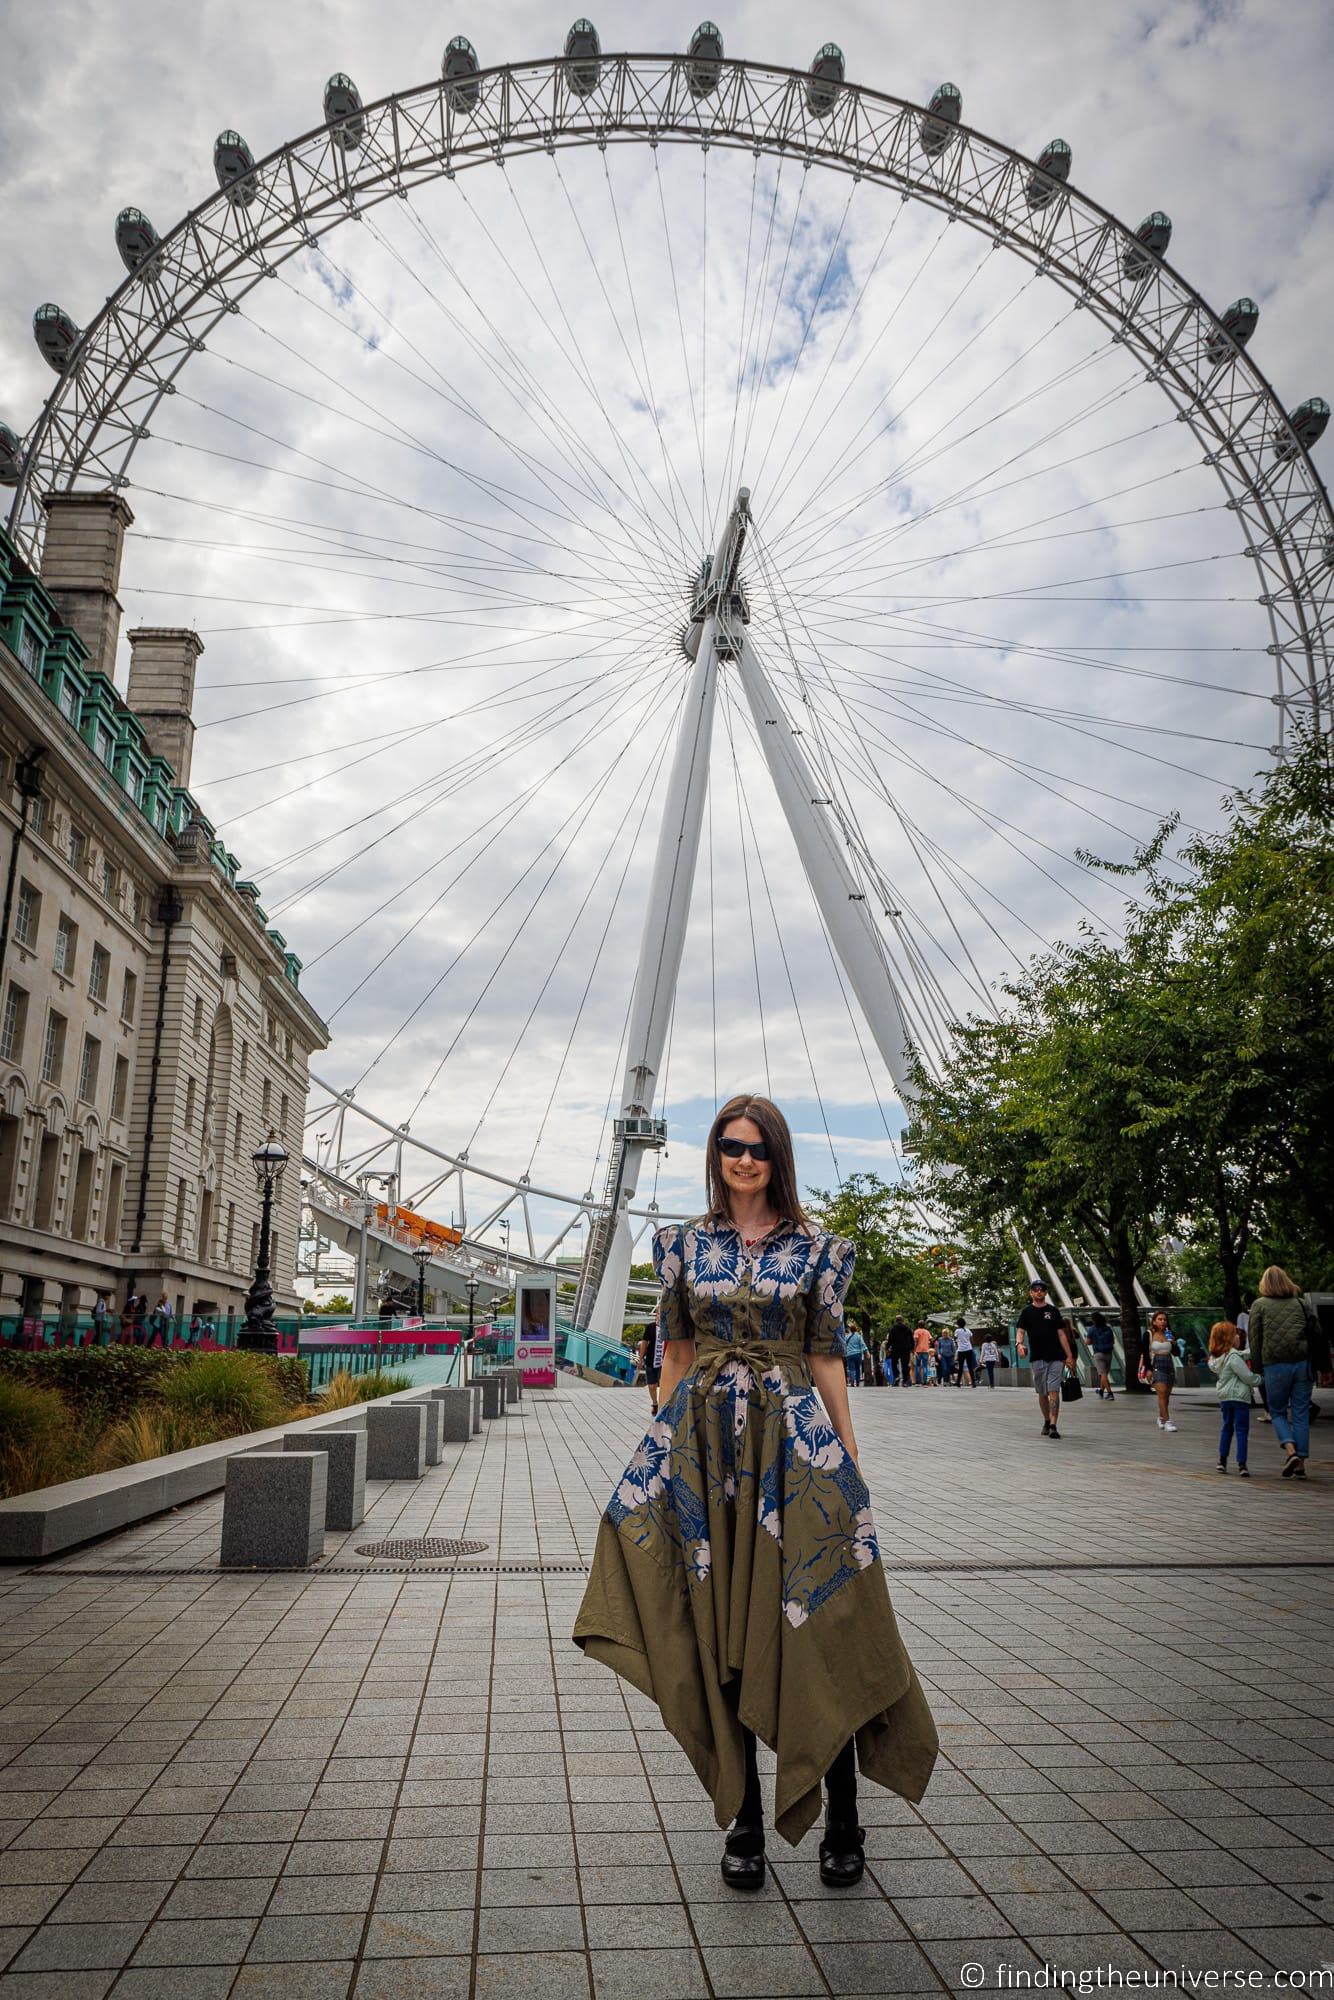 London Eye - Our Itinerary